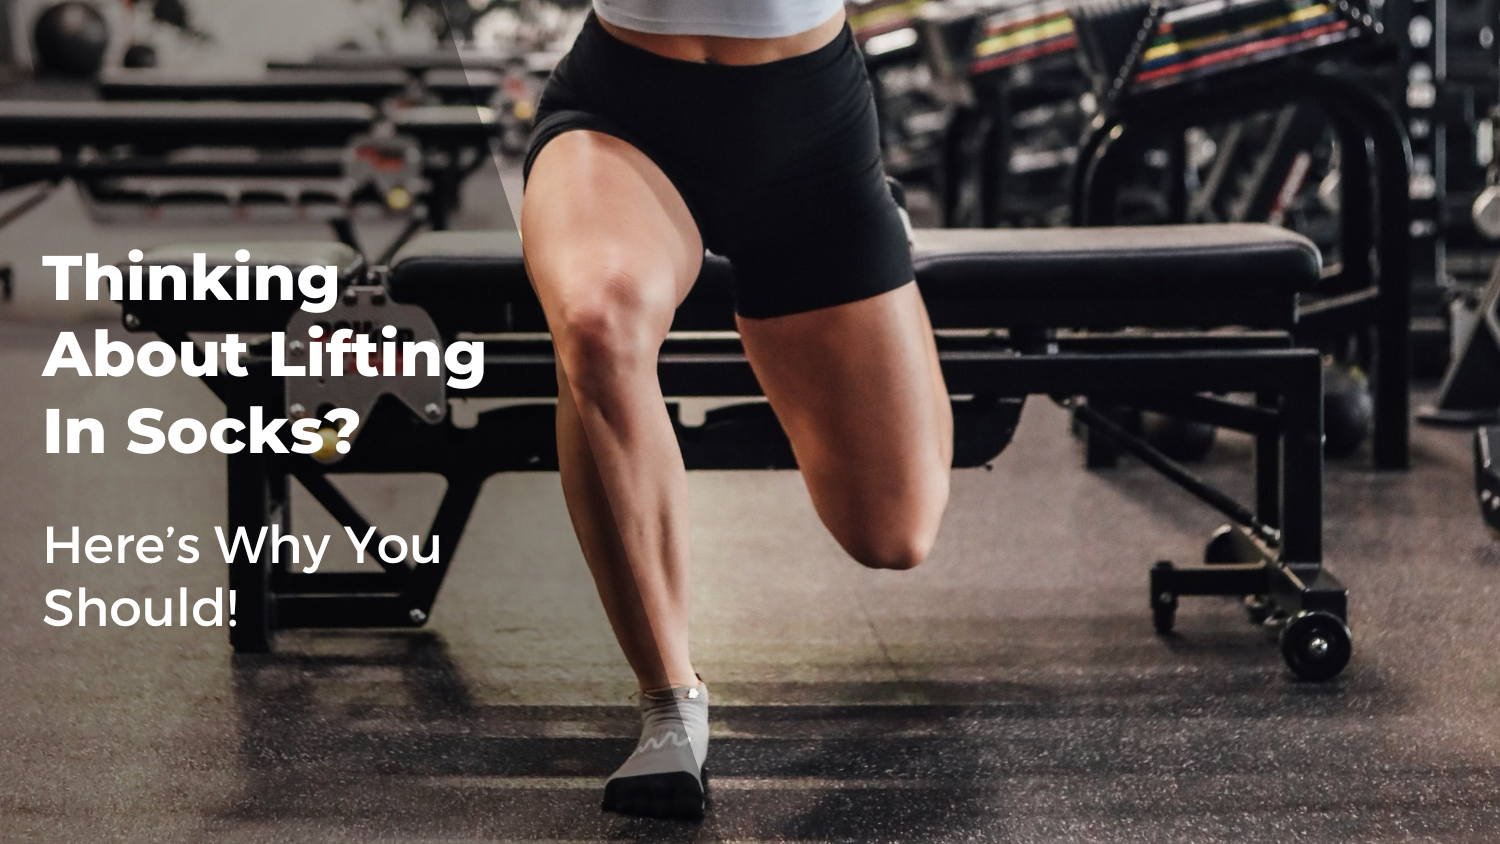 Thinking About Lifting In Socks? Here's Why You Should!